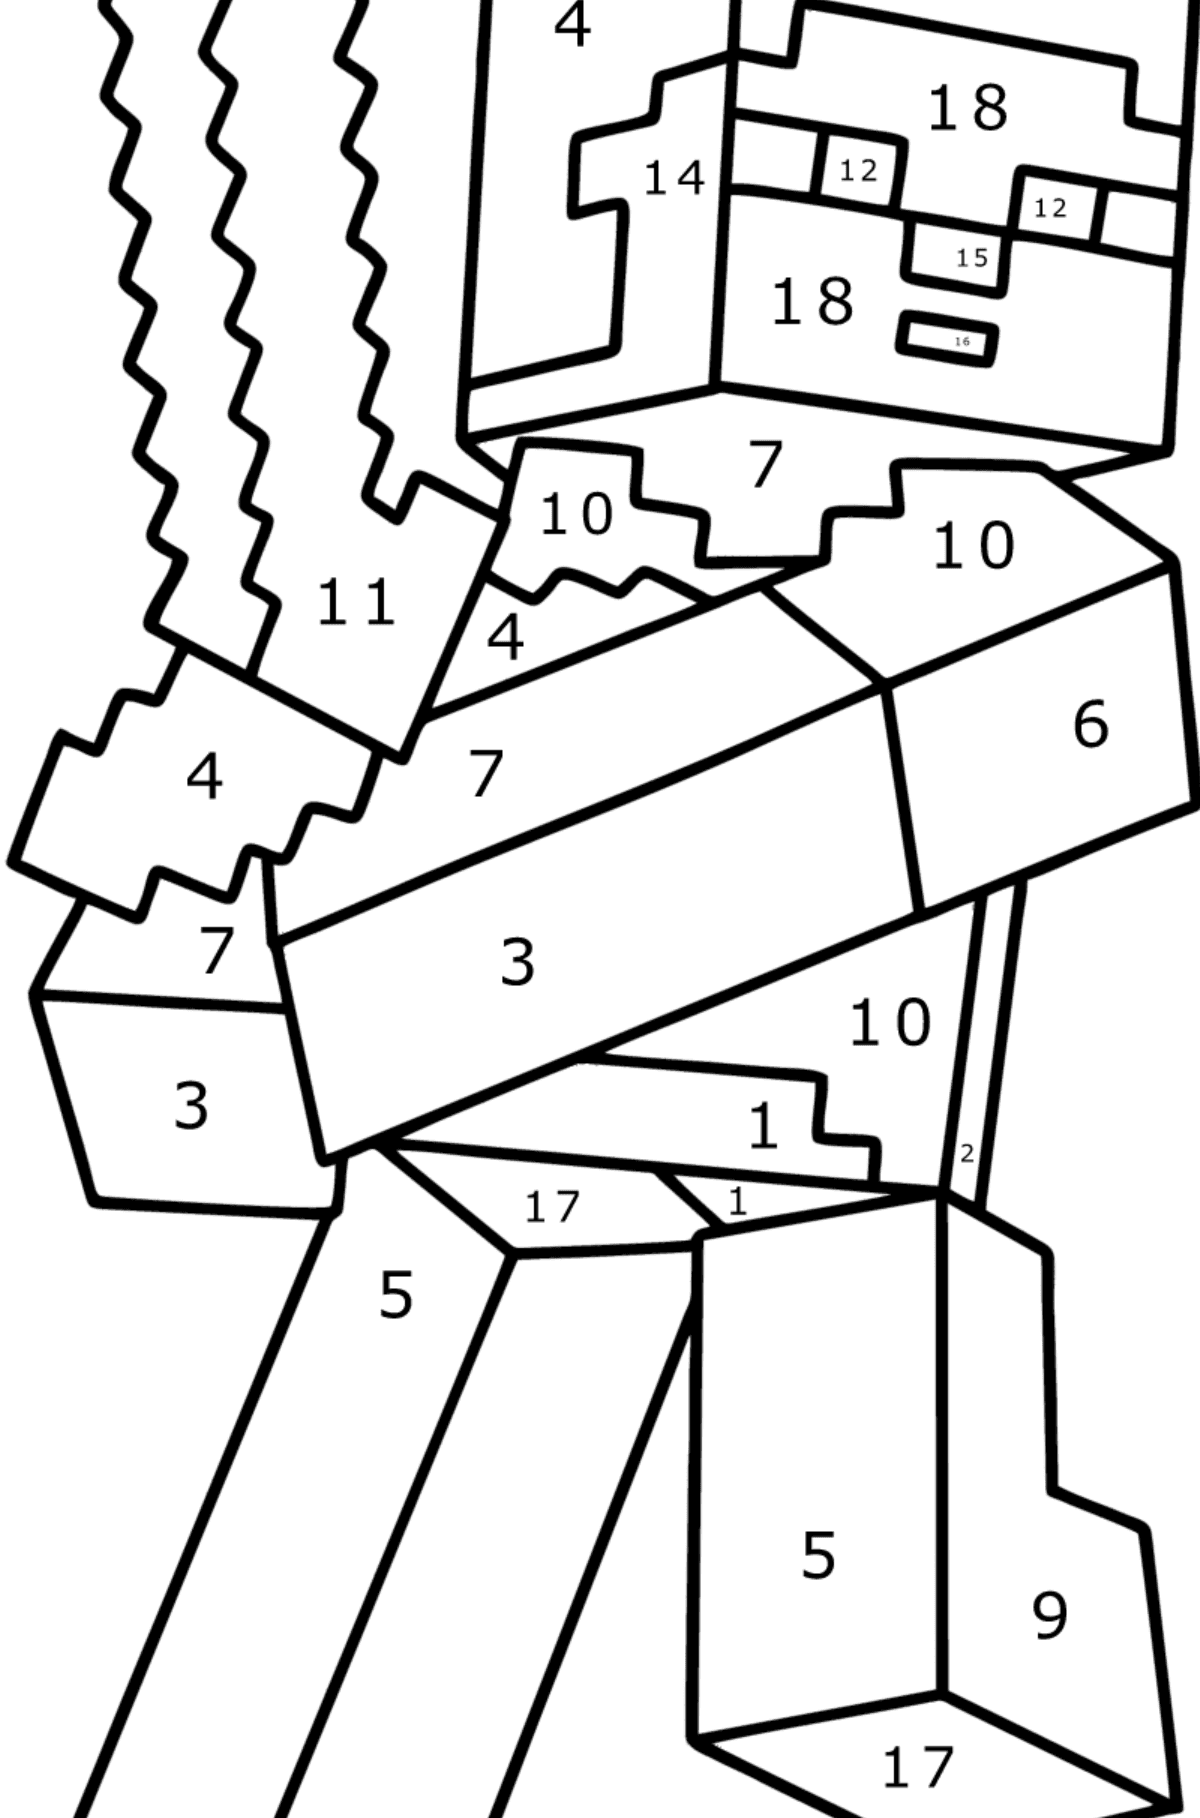 Minecraft Steve coloring page - Coloring by Numbers for Kids